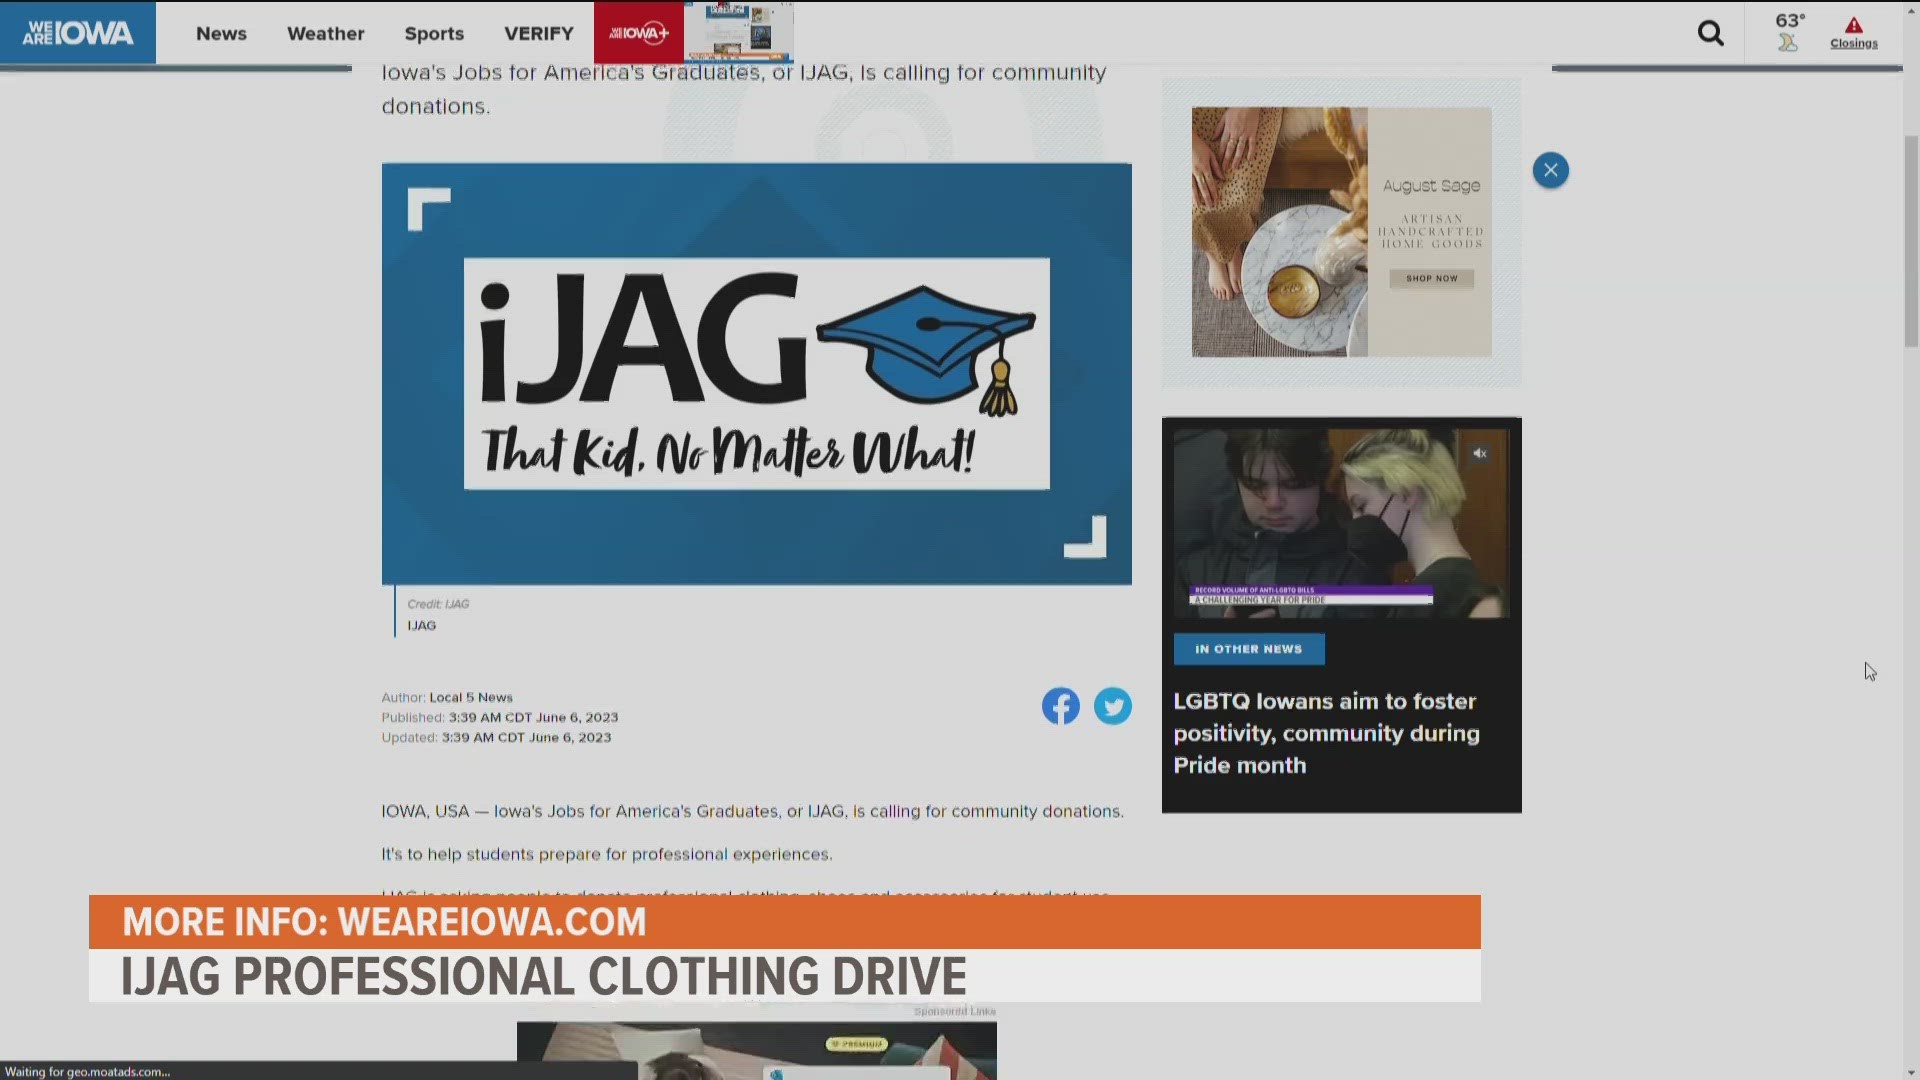 IJAG professional clothing drive underway